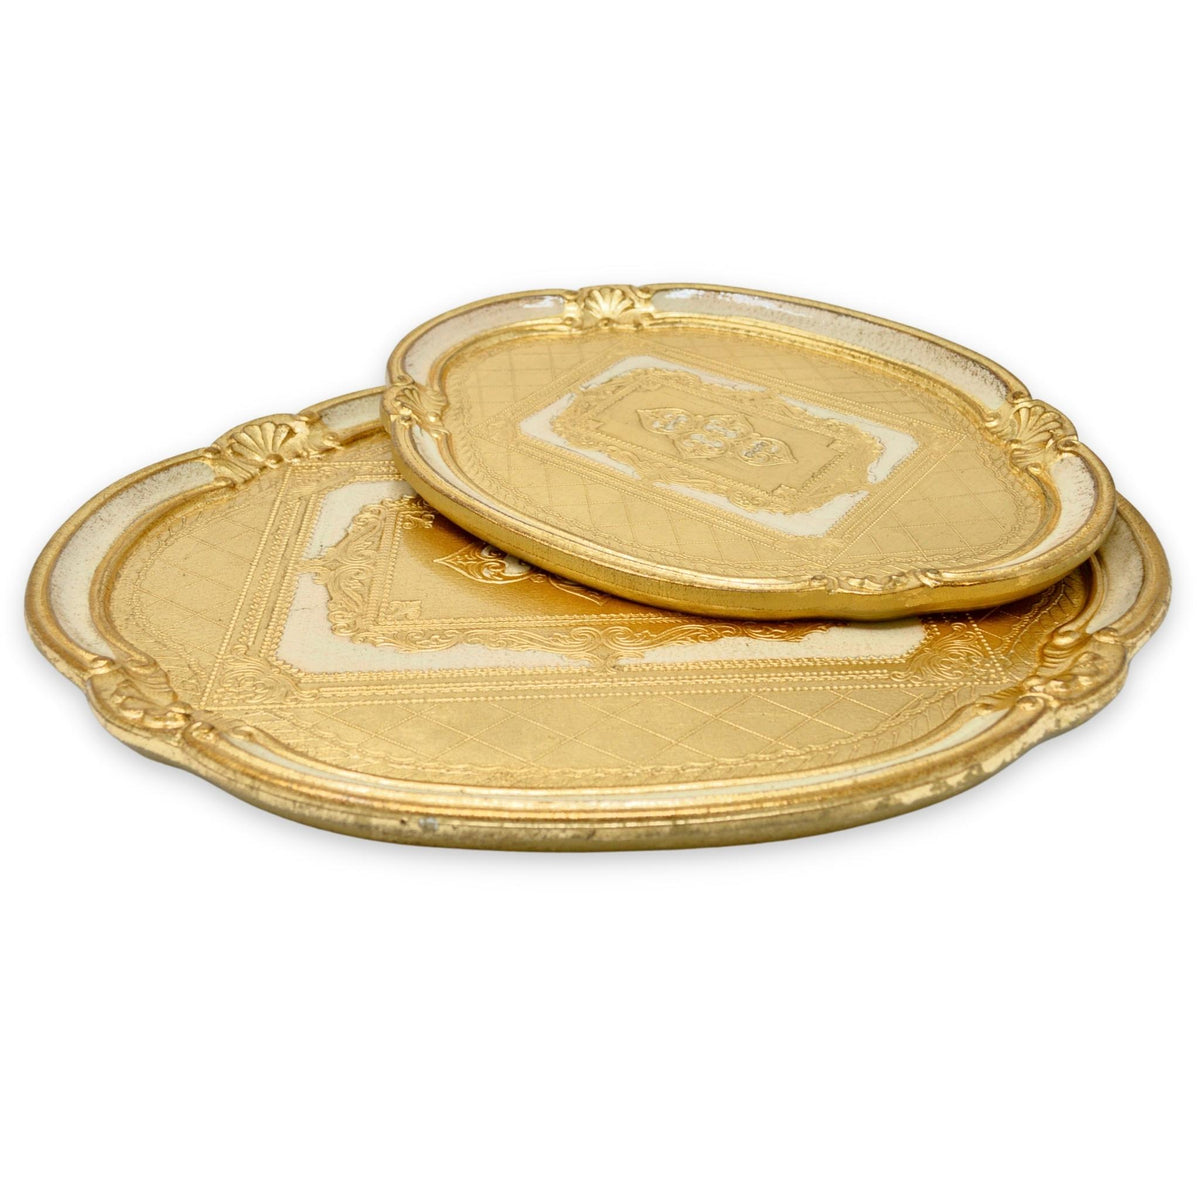 Florentine Oval Carved Wood Trays, Set of 2, Cappuccino, Made in Italy - My Italian Decor